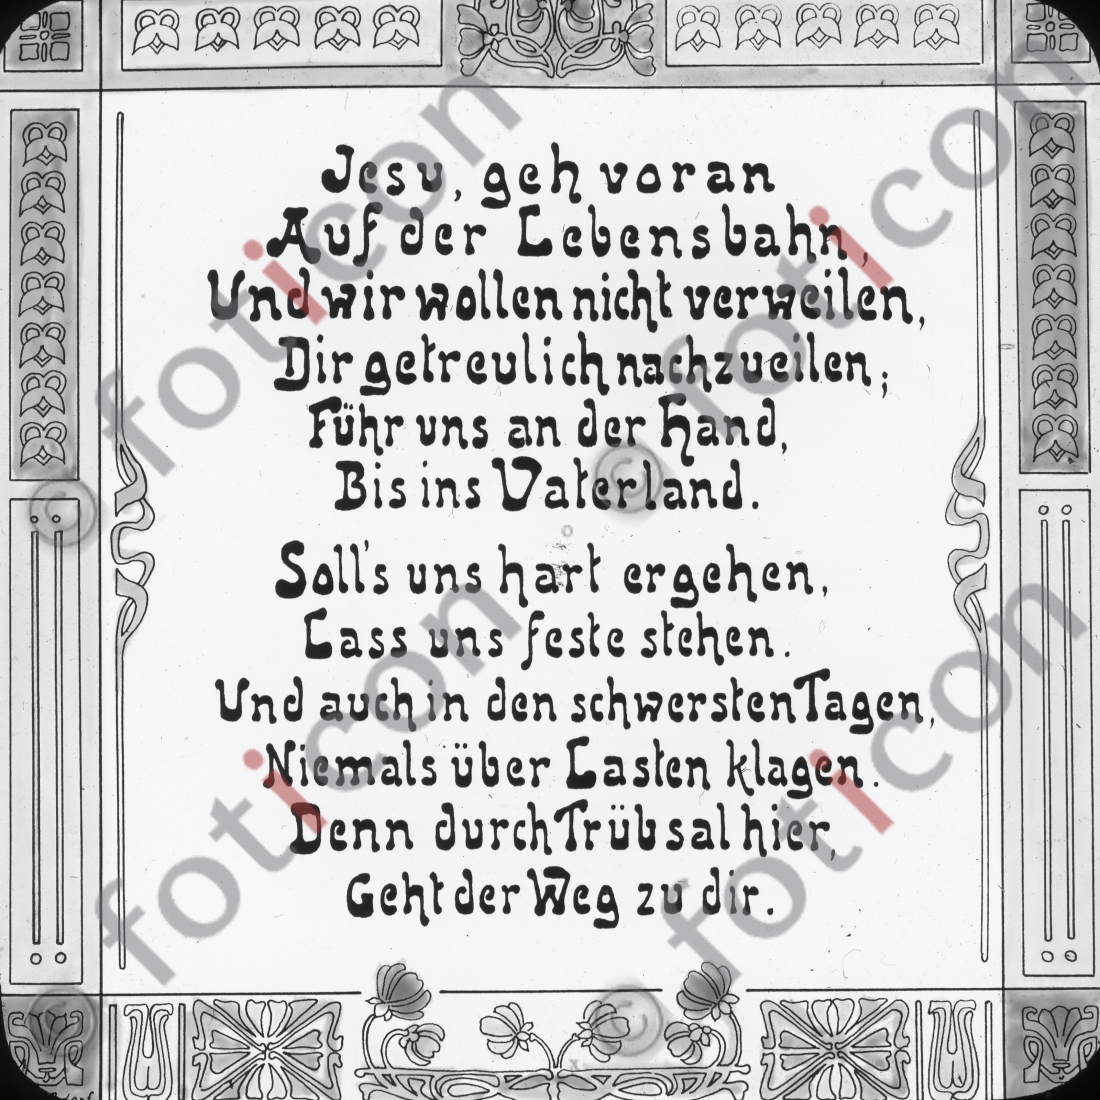 Liedtext aus dem "Nachfolgelied" | Lyric from the "follow-up song" (foticon-simon-150-061-sw.jpg)